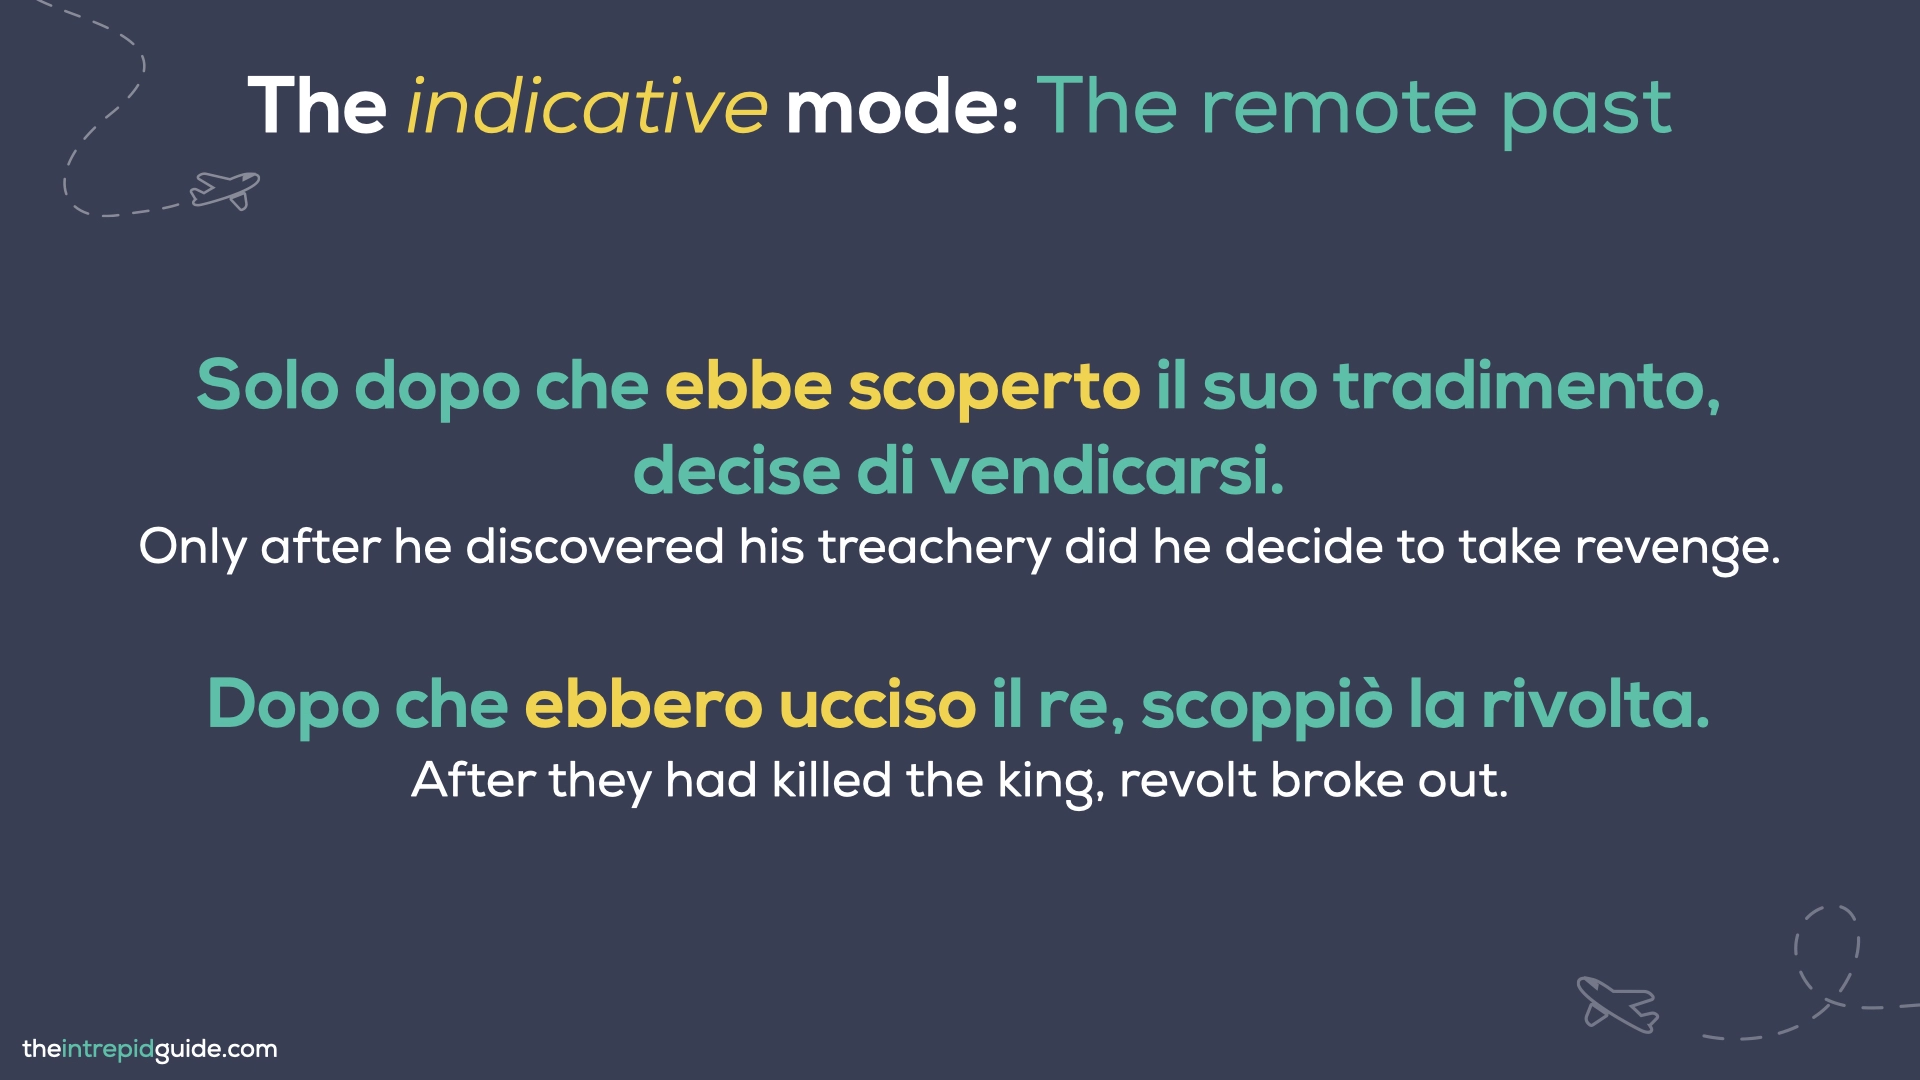 Italian tenses - The Indicative Mode - The Remote Past 2